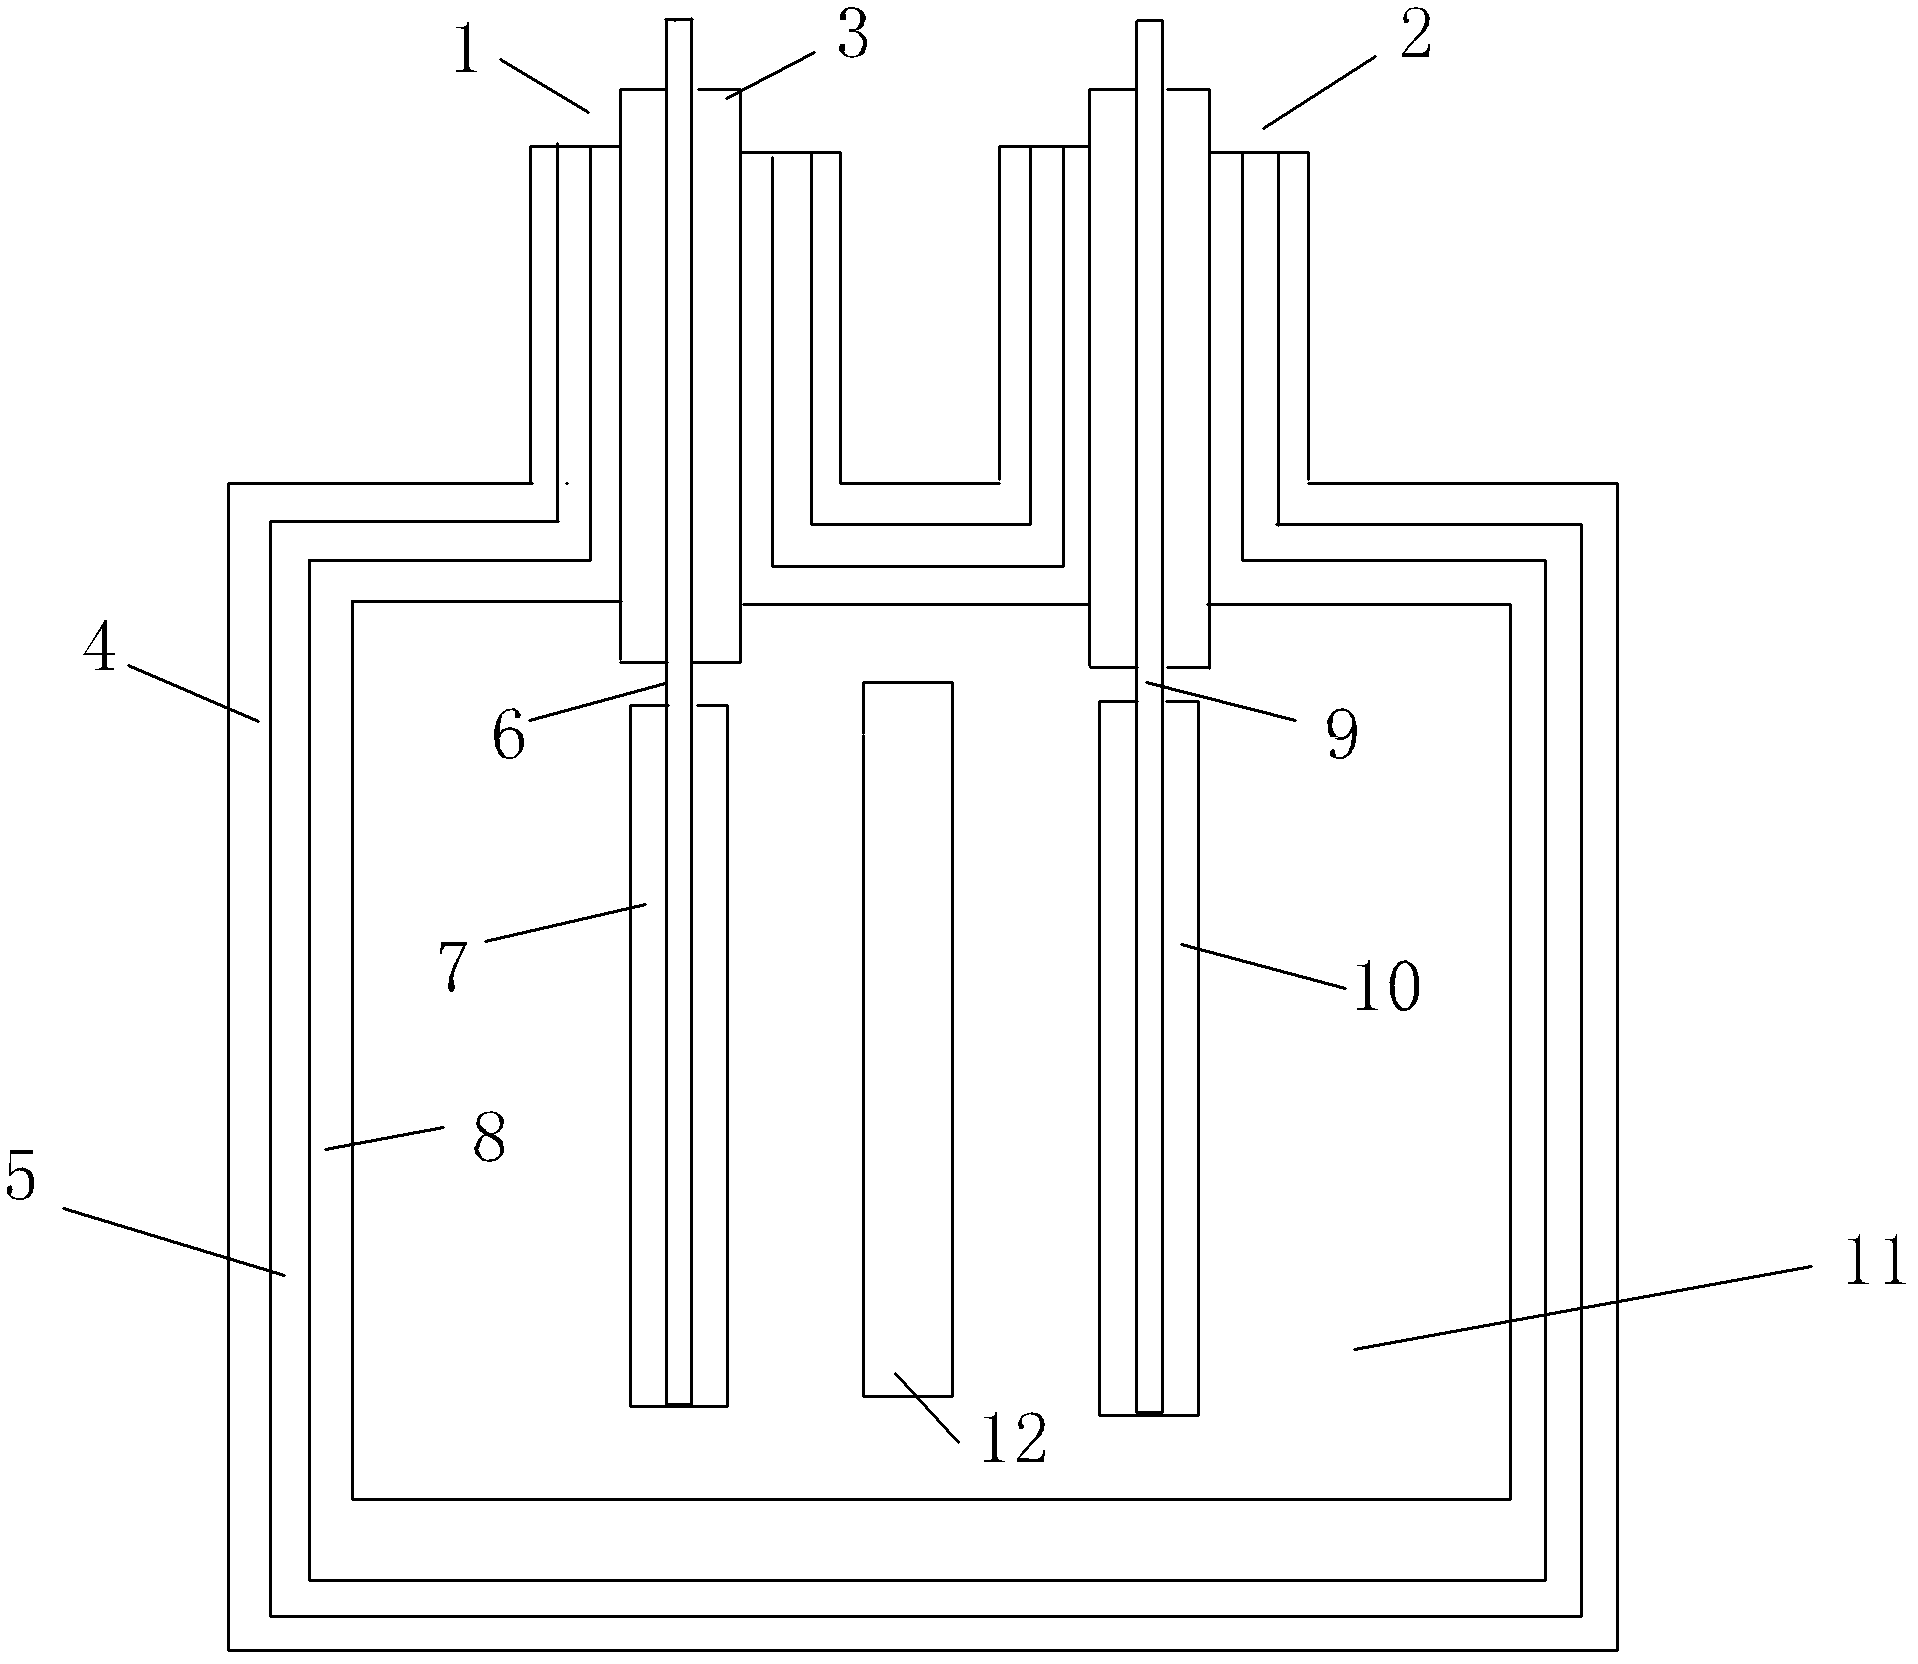 Method for detecting corrosion condition inside lithium ion battery with flexible package